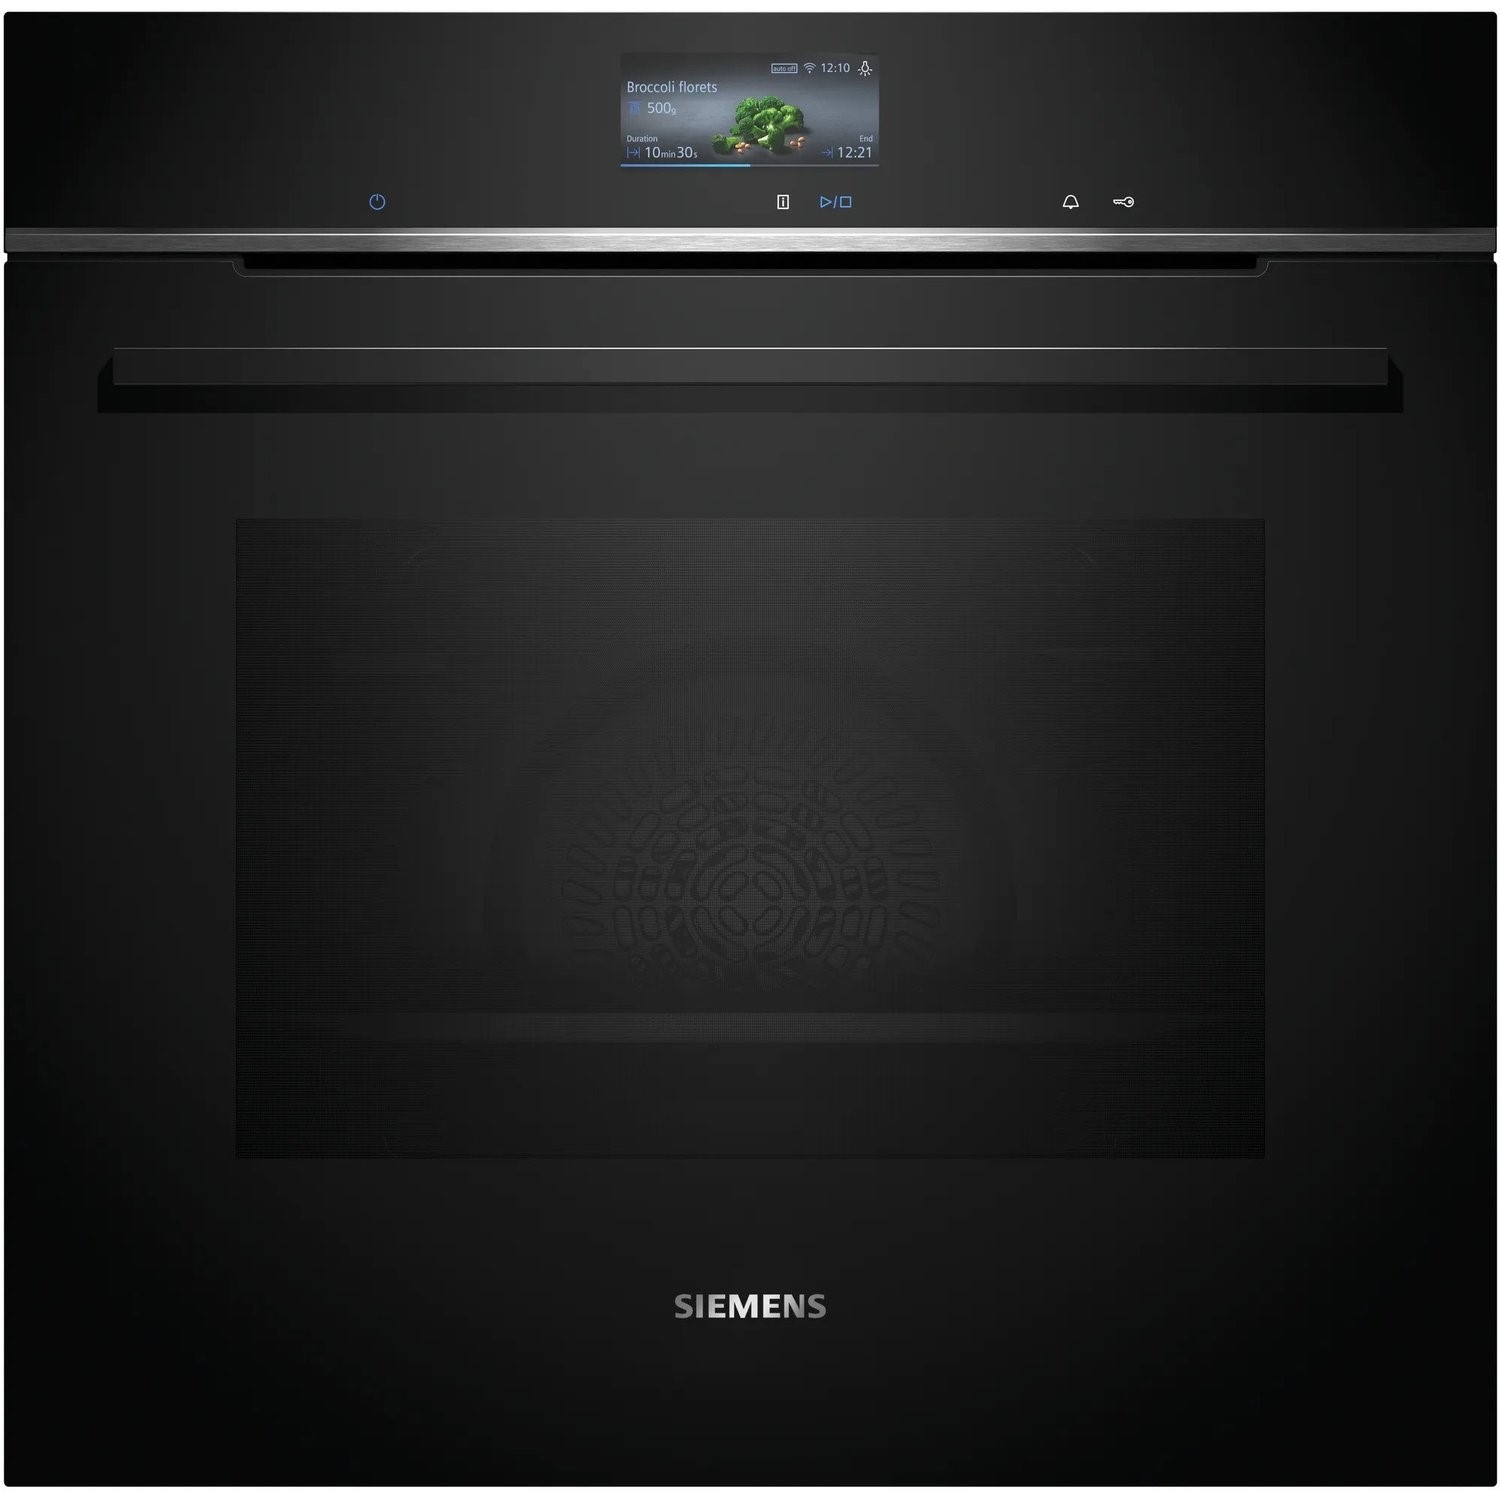 Photos - Other for Computer Siemens iQ700 Electric Single Oven - Black HB736G1B1B 